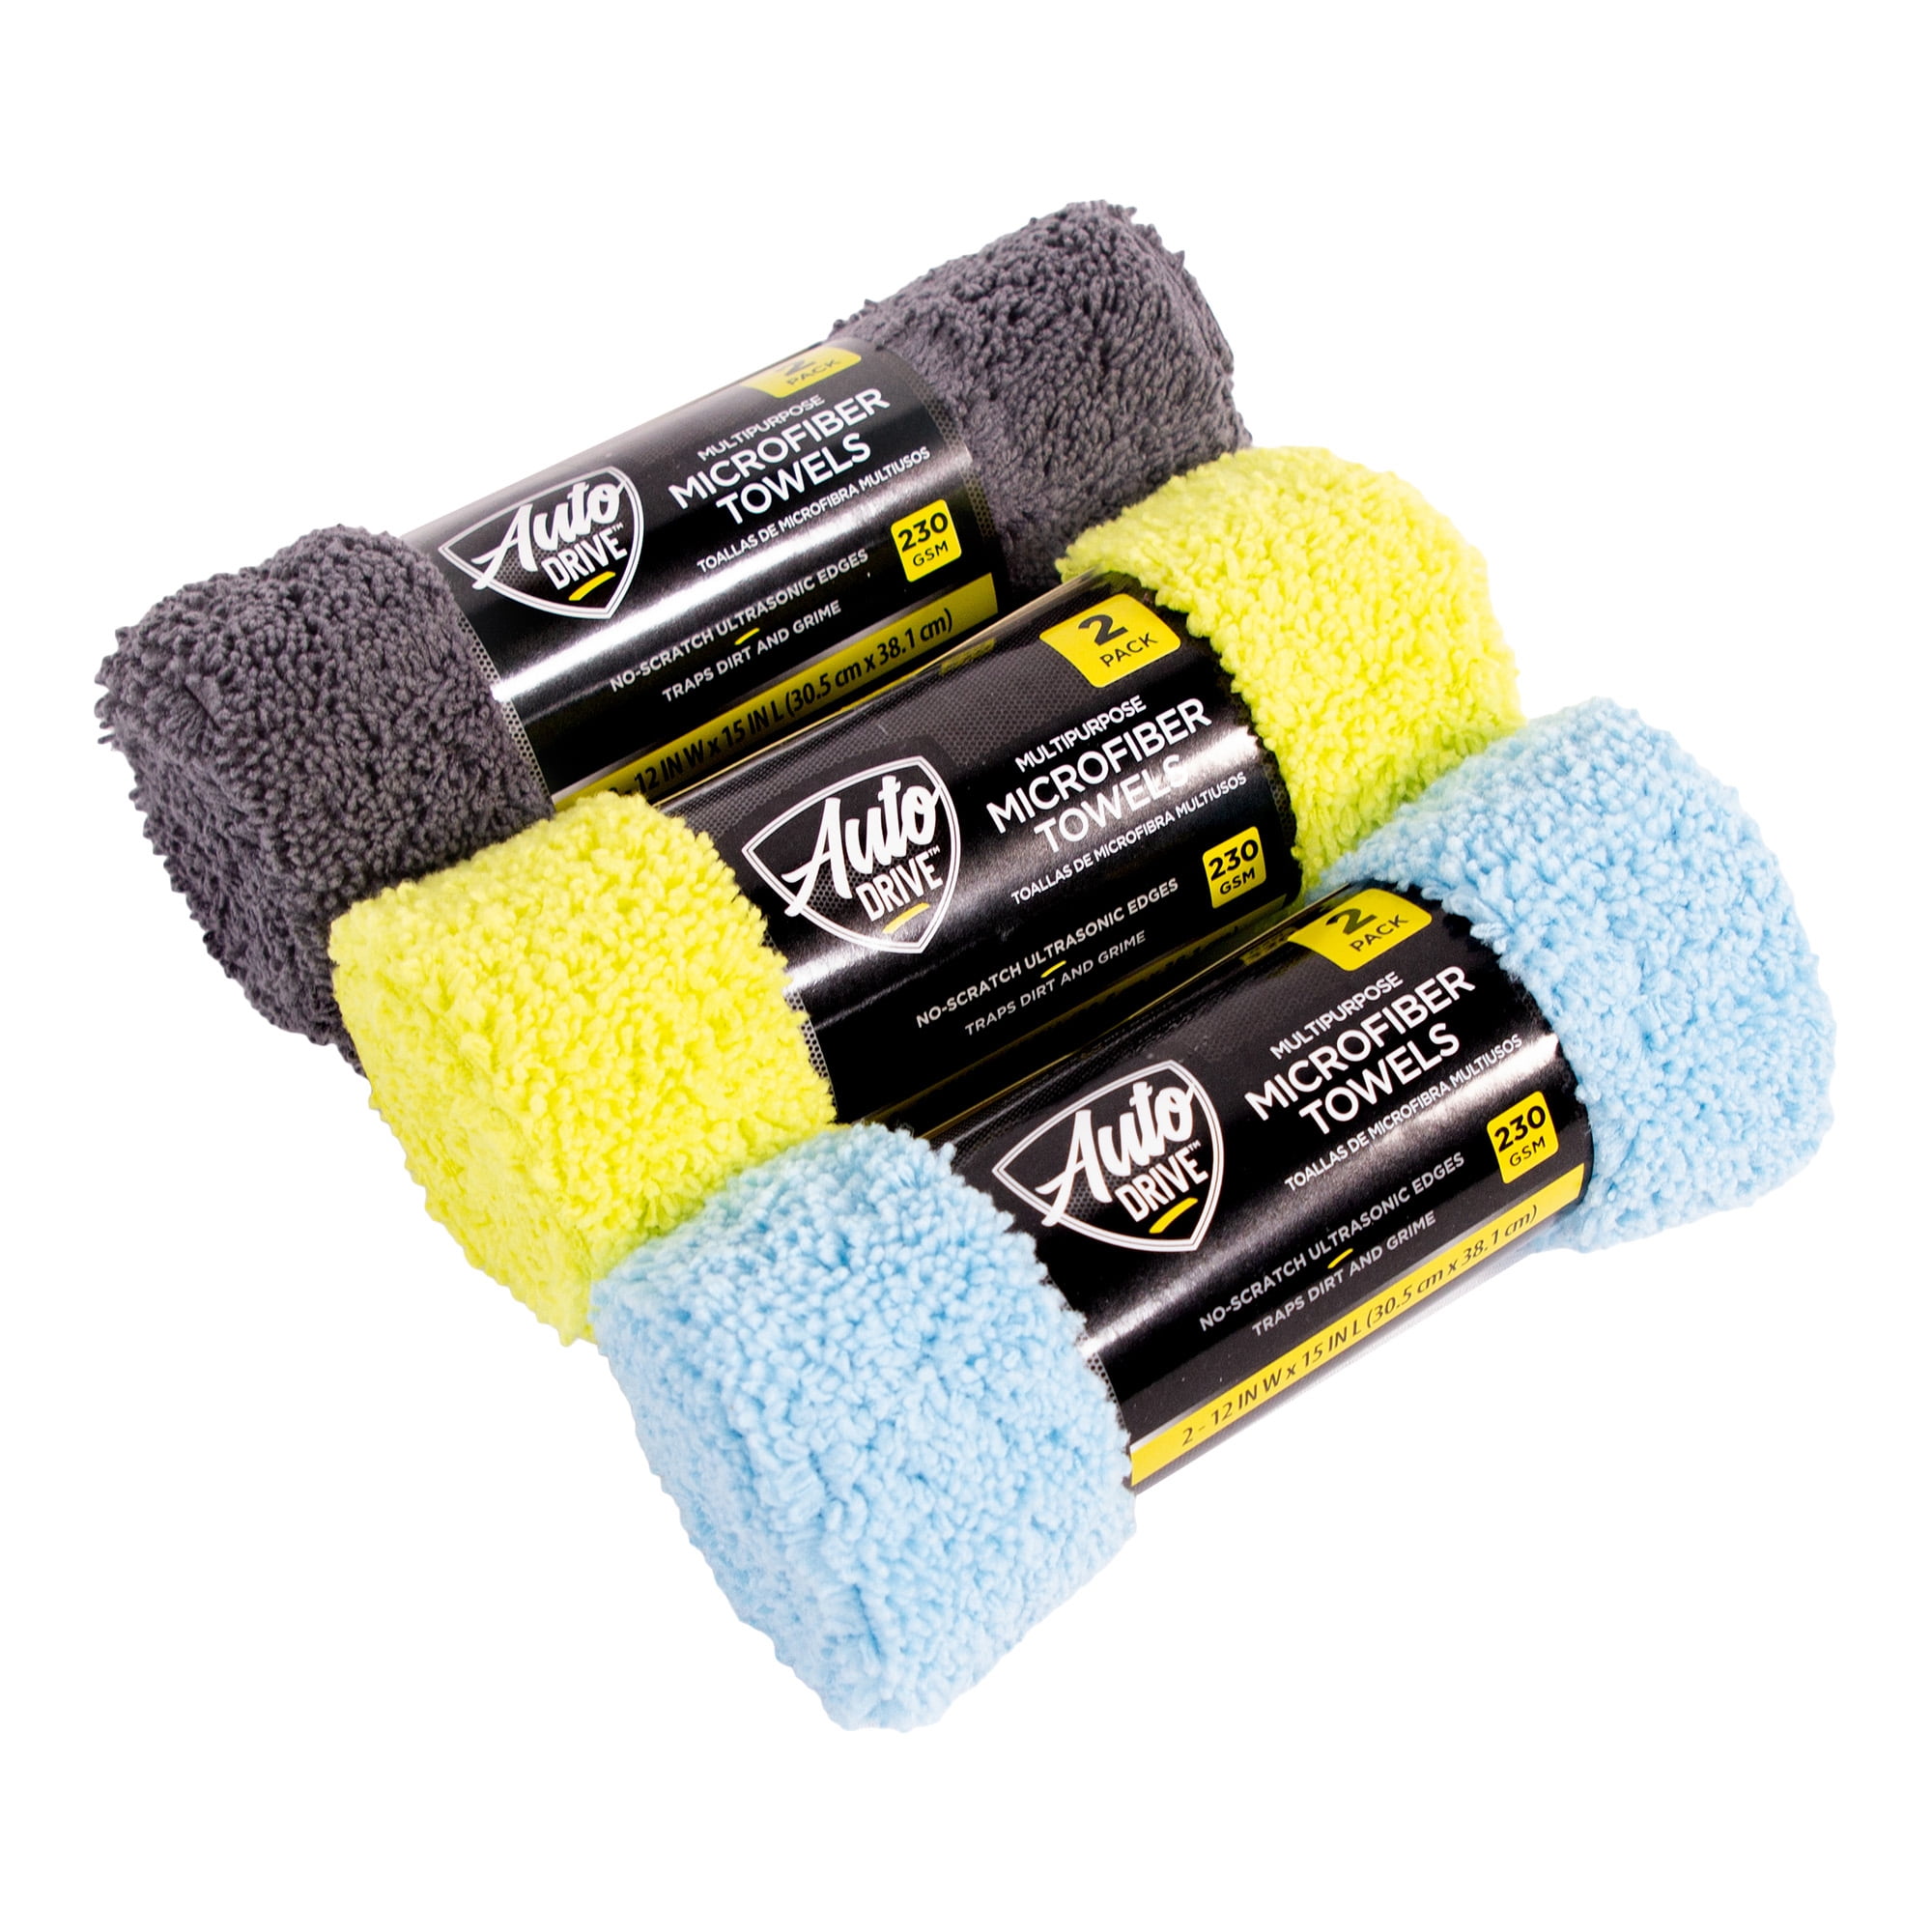 2-Pack Auto Drive Microfiber Multi-Purpose Cleaning Towel (Assorted Colors) $1.97 at Walmart w/ Free Store Pickup